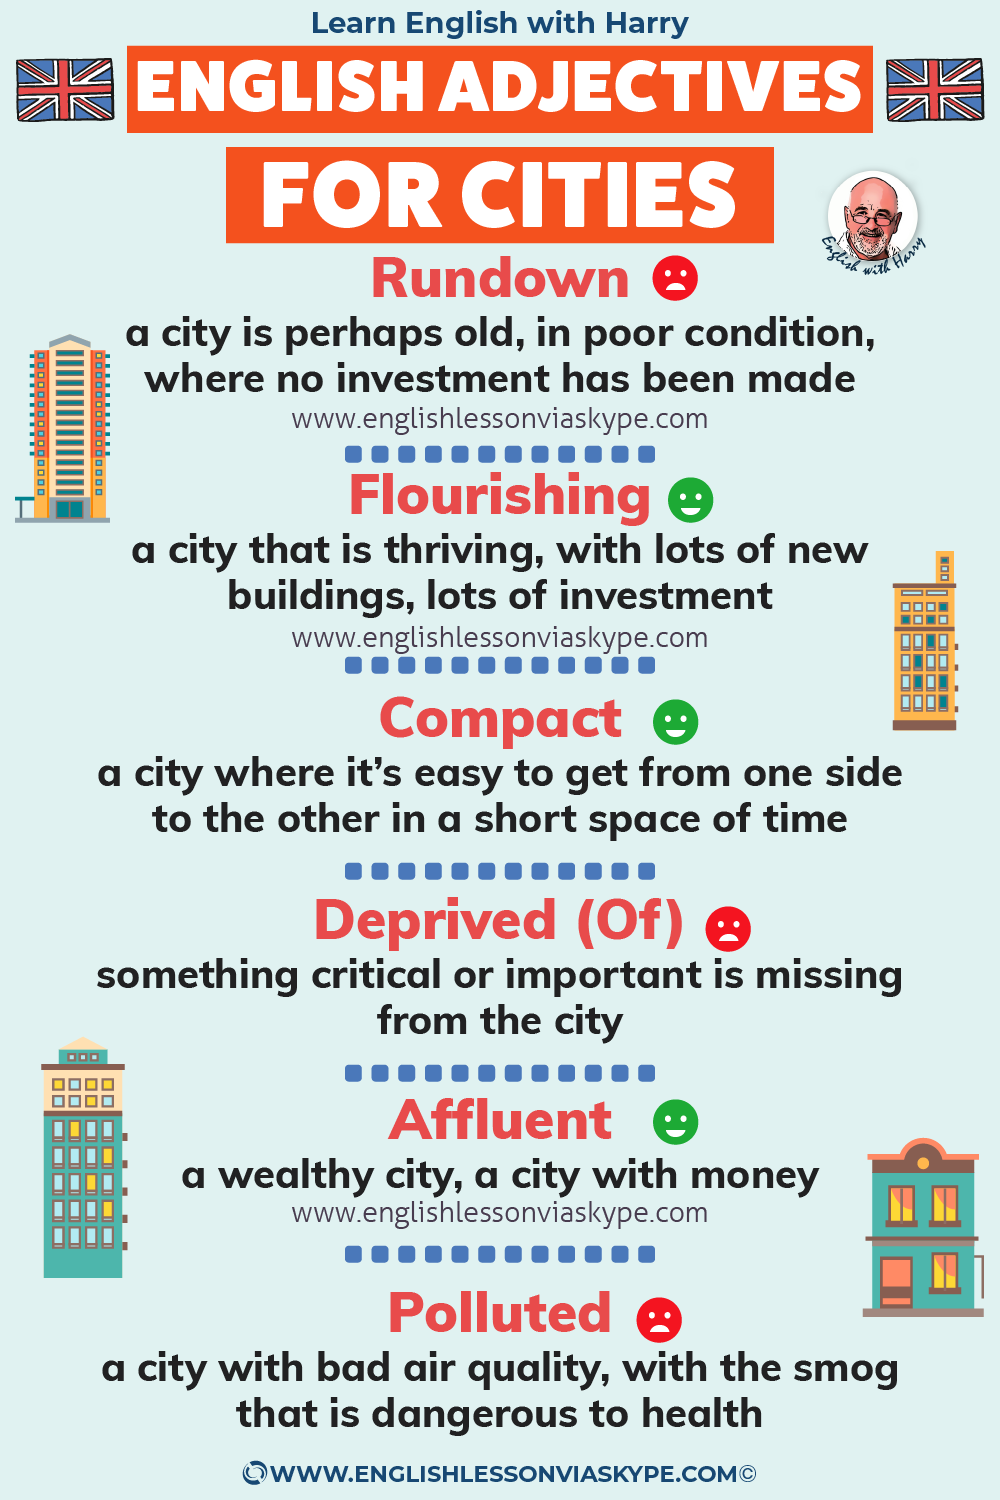 English adjectives for describing cities and city life. Study advanced English. Improve your speaking and writing skills. Online English lessons over Zoom and Skype at www.englishlessonviaskype.com #learnenglish #englishlessons #EnglishTeacher #vocabulary